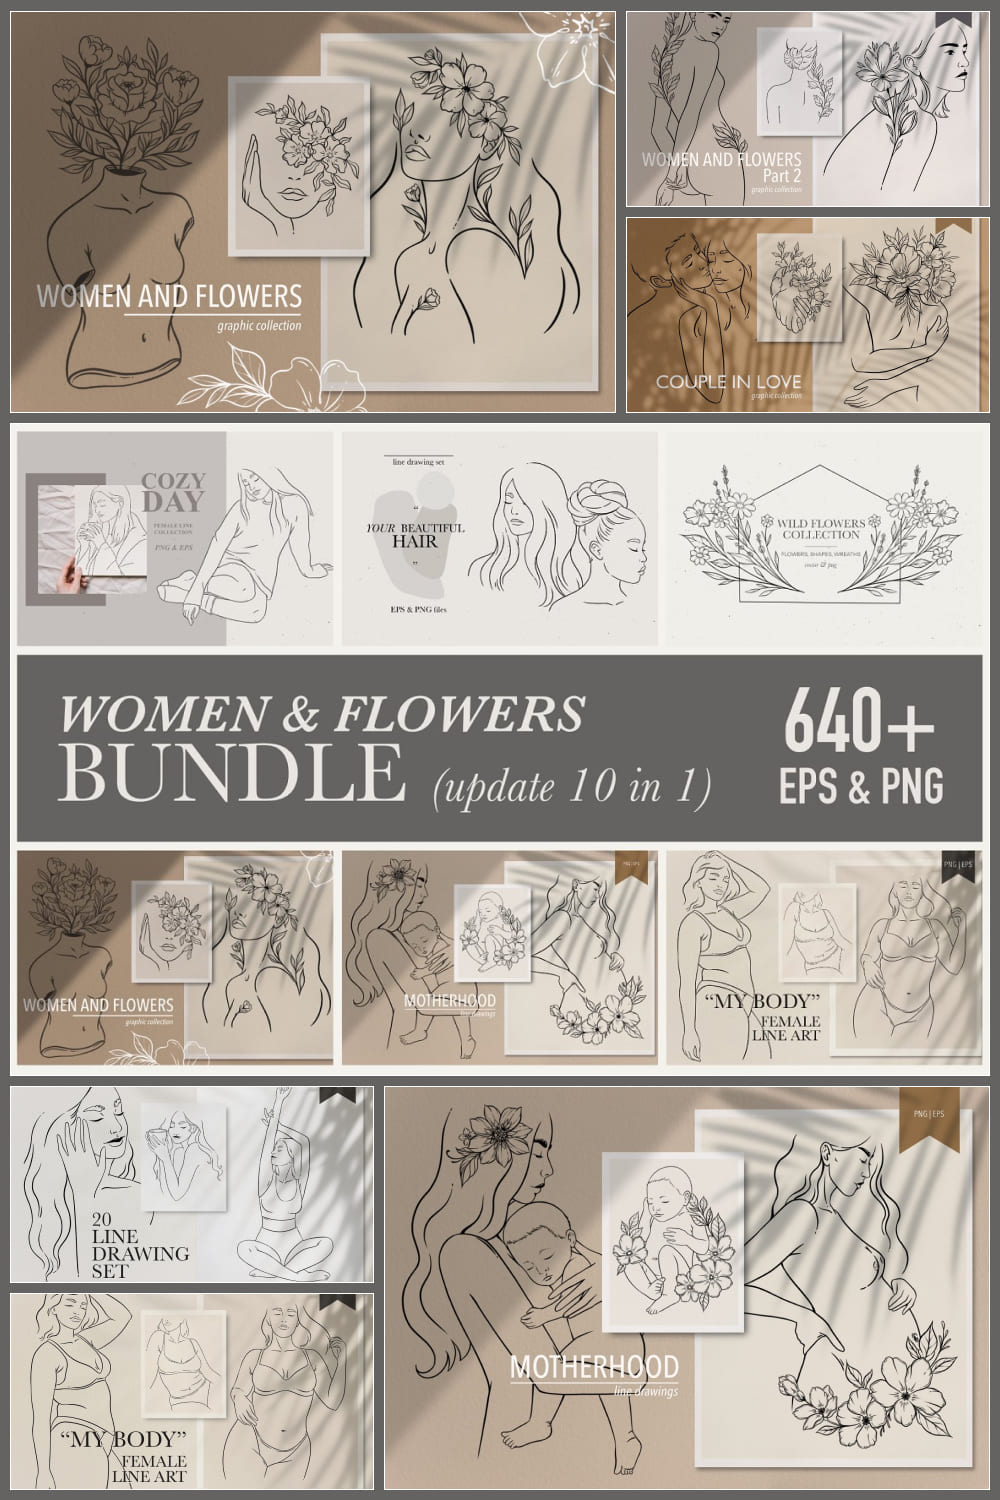 Minimalistic and extremely elegant sketches with women and flowers.